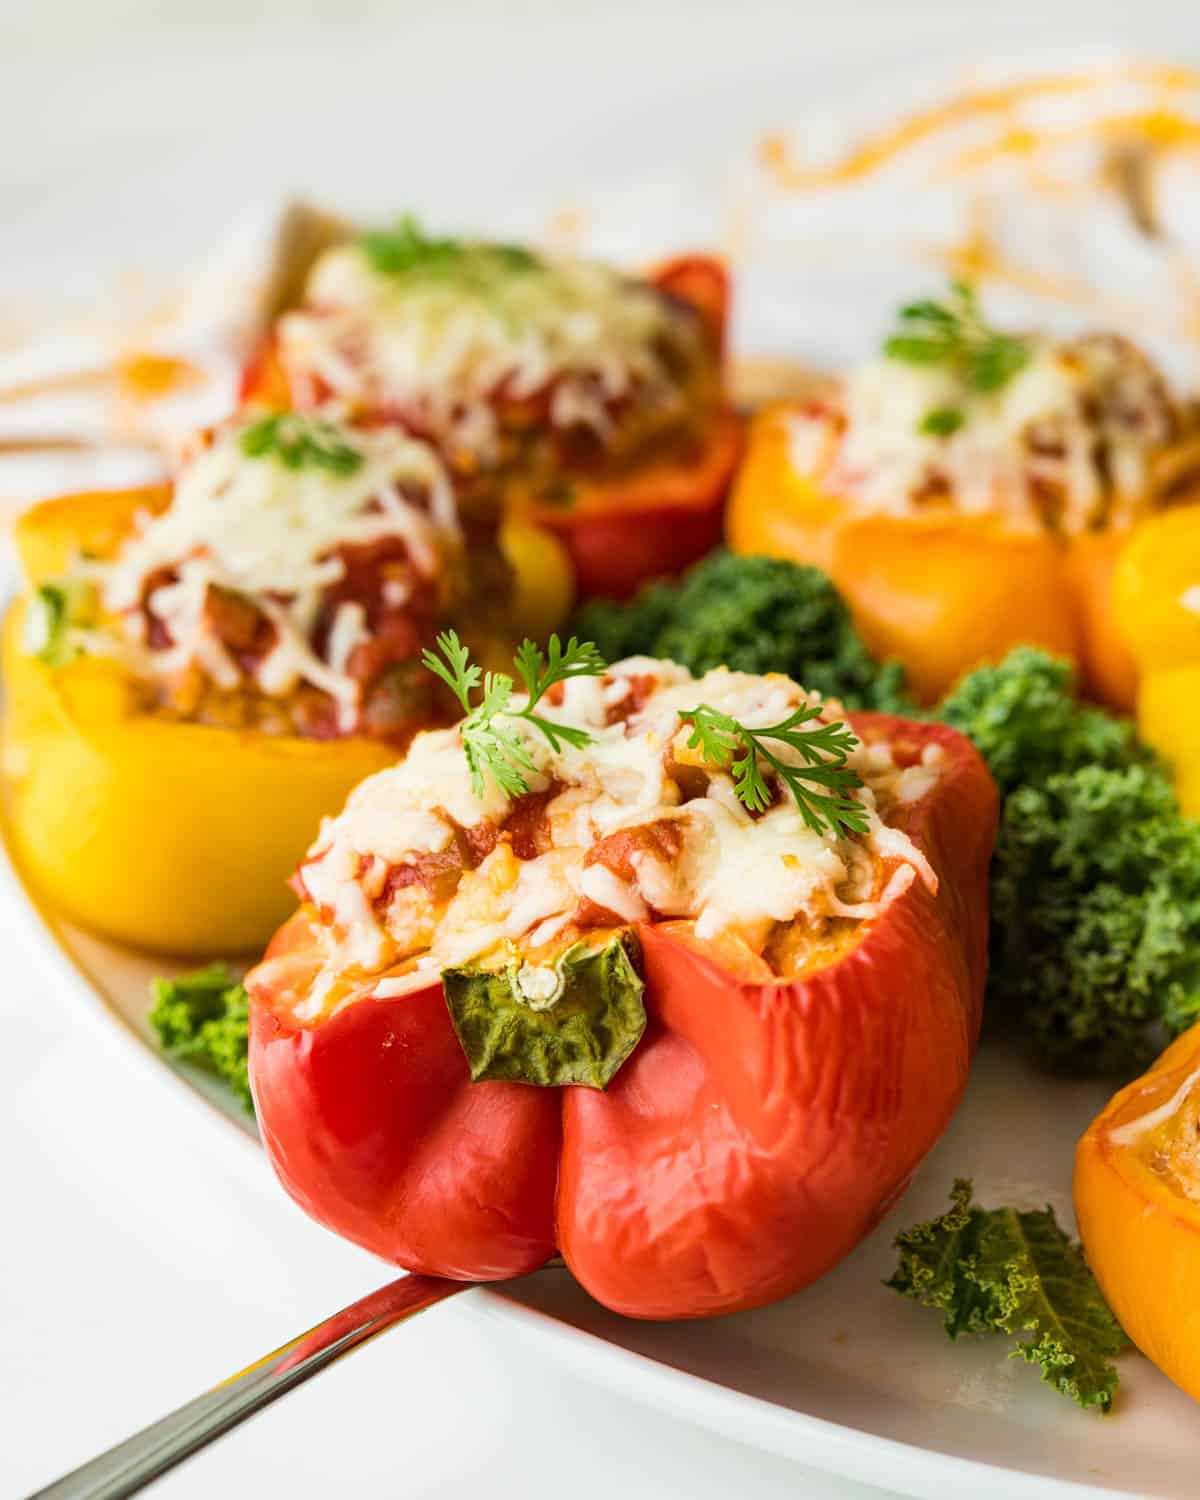 Serving the Mexican stuffed peppers on a platter.